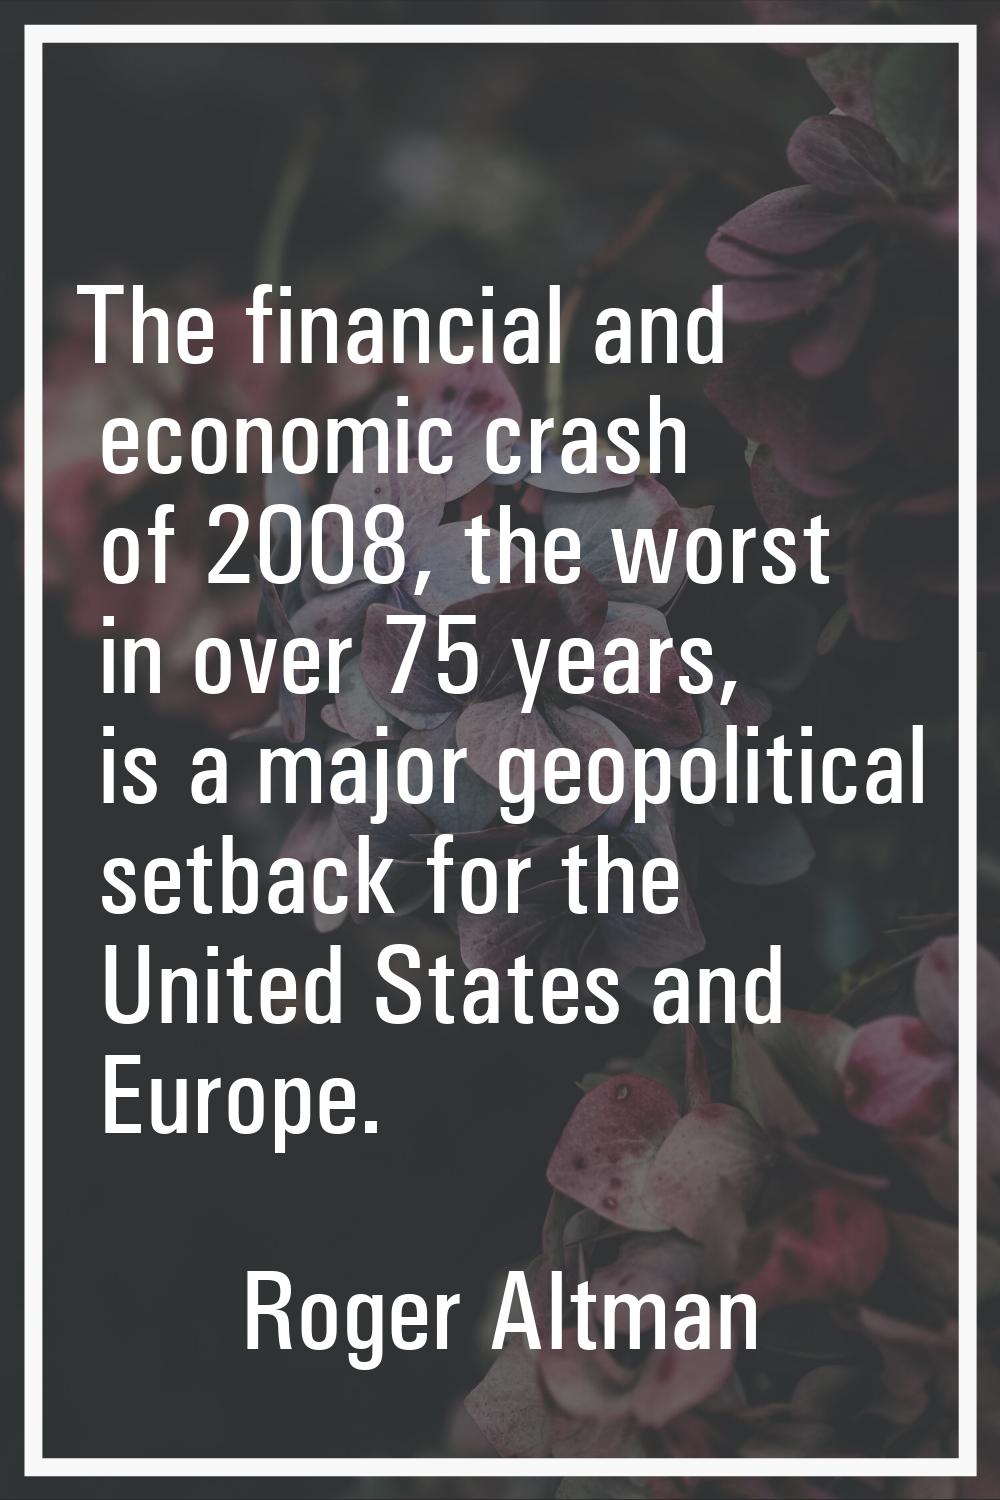 The financial and economic crash of 2008, the worst in over 75 years, is a major geopolitical setba